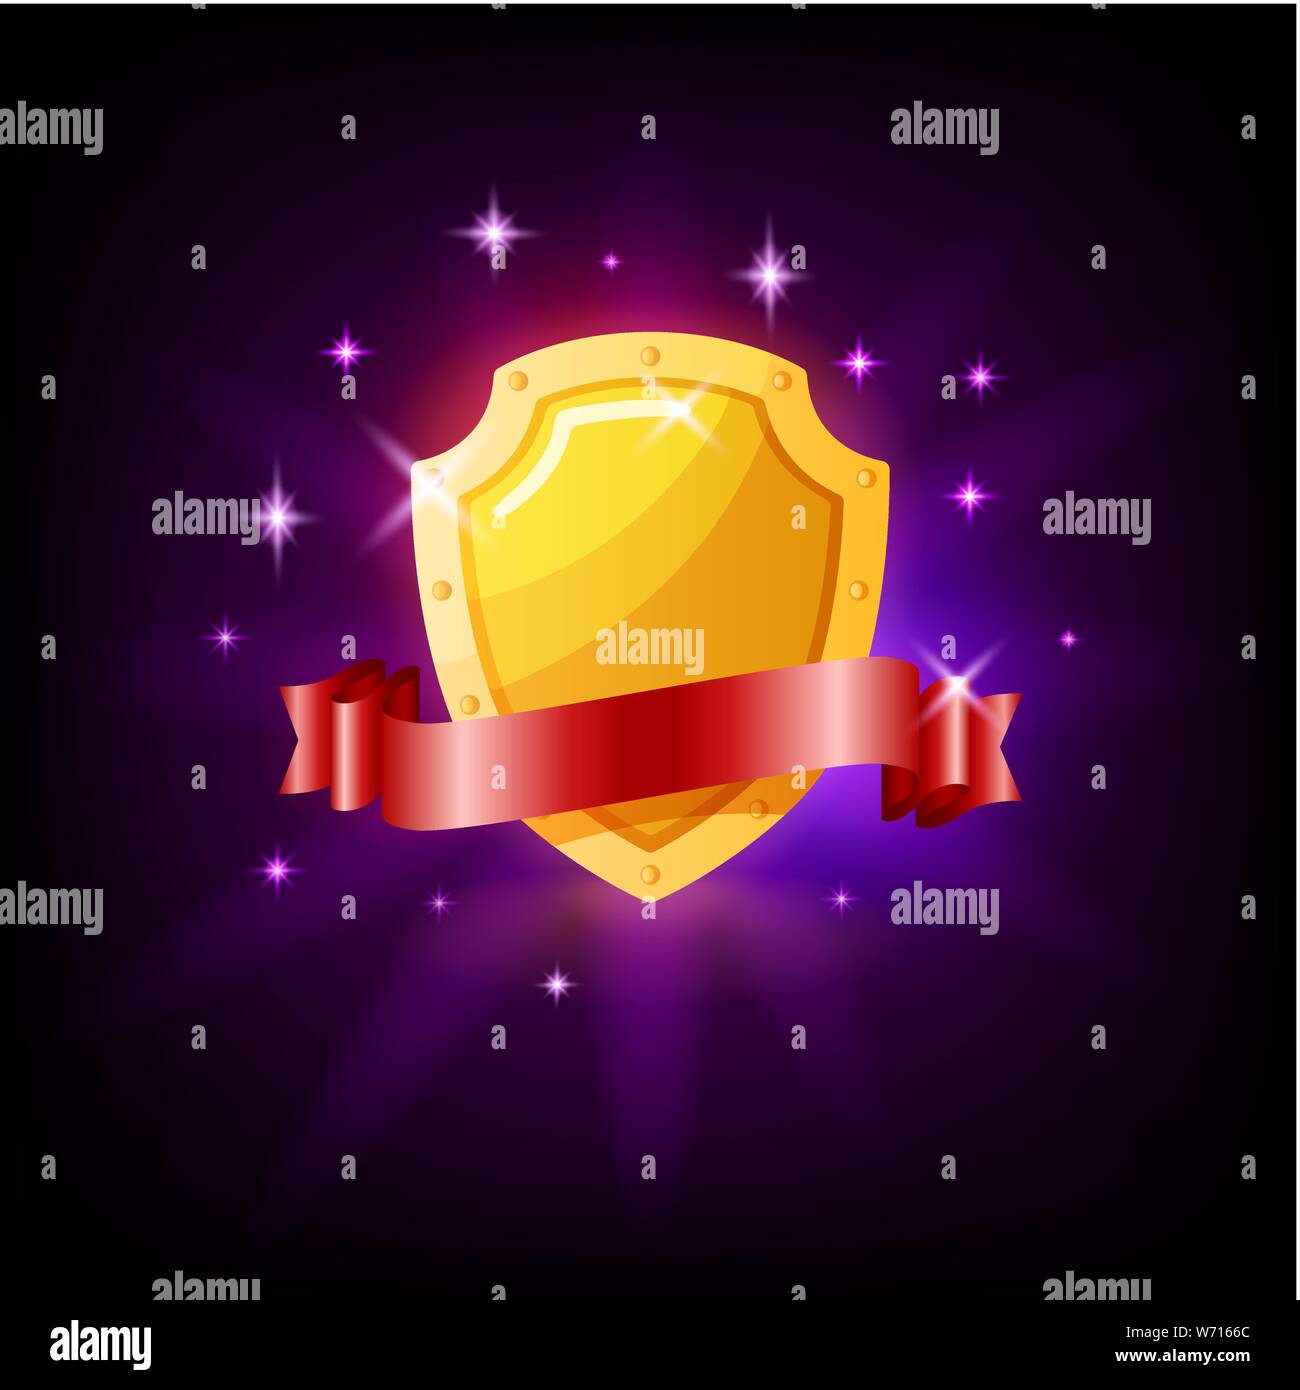 https://c8.alamy.com/comp/W7166C/gold-shield-and-red-ribbon-slot-icon-for-online-casino-or-mobile-game-vector-illustration-with-sparkles-on-dark-purple-background-W7166C.jpg